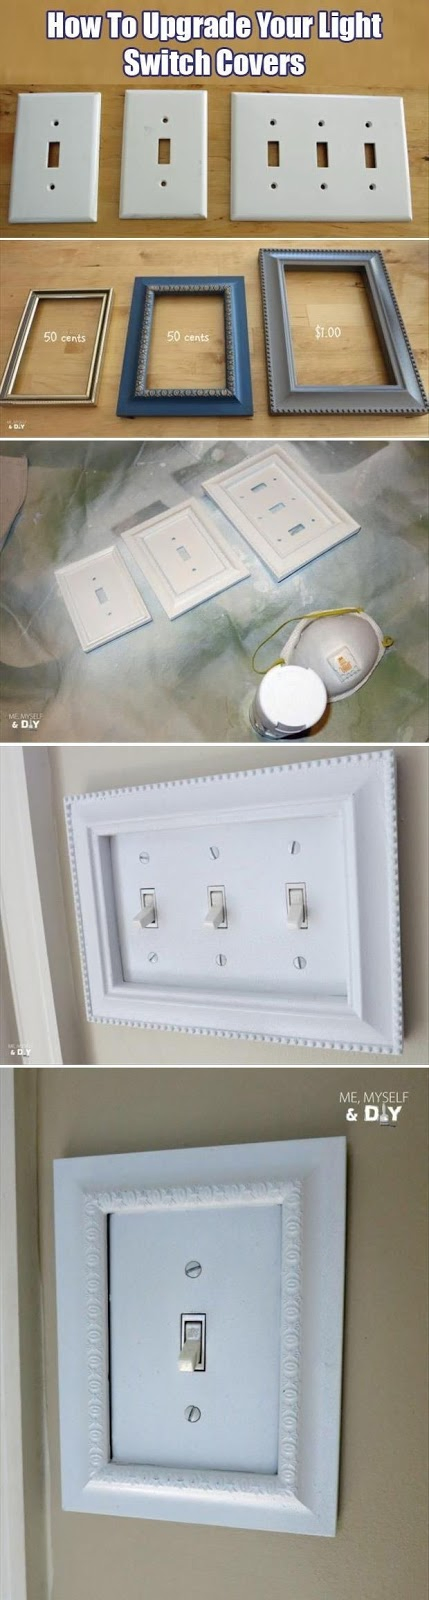 Decorate your light switch